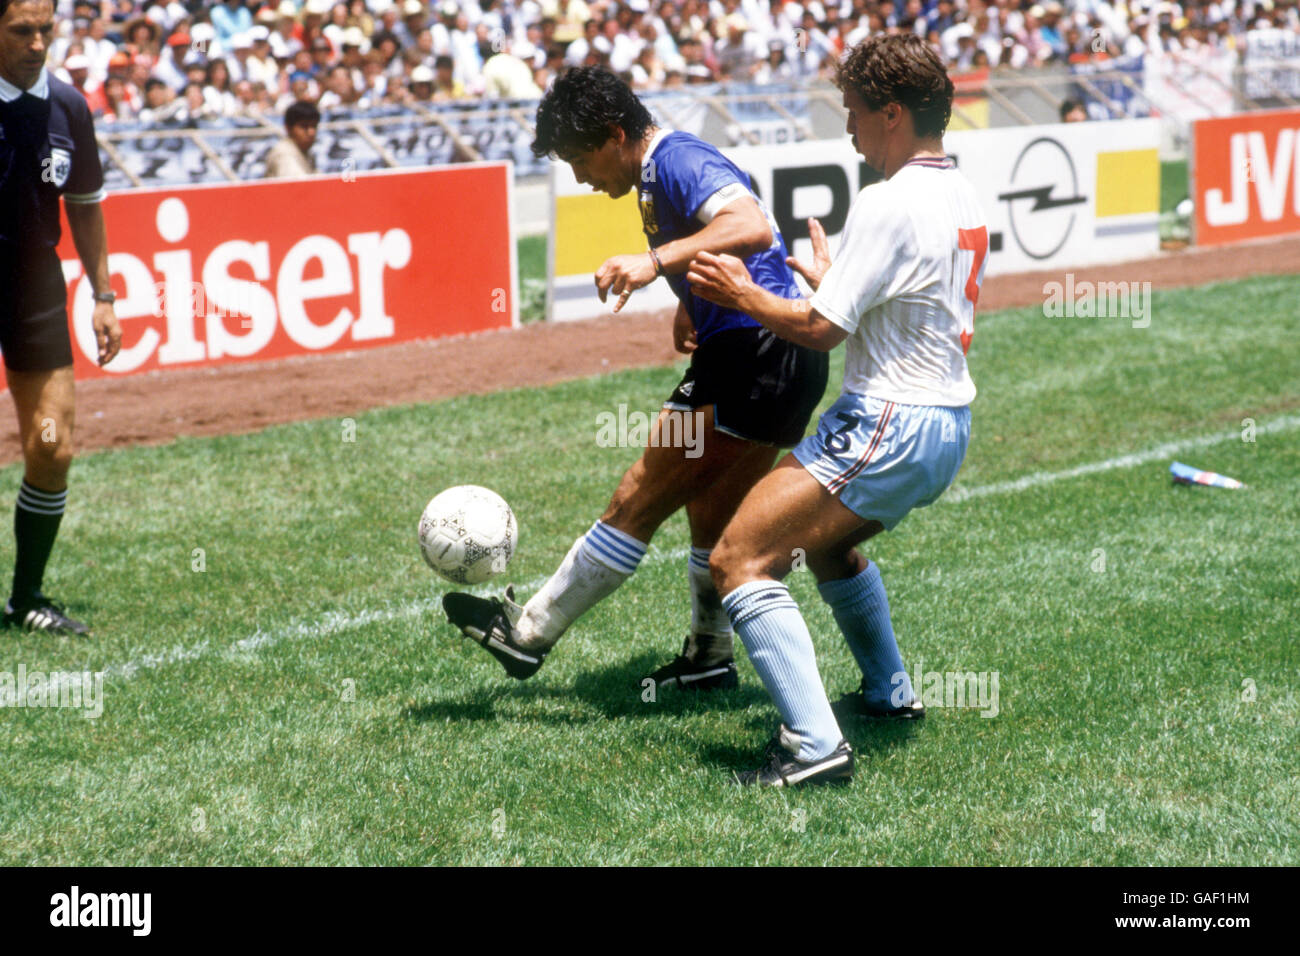 (L-R) Argentina's Diego Maradona juggles the ball as he shields it from England's Kenny Sansom Stock Photo